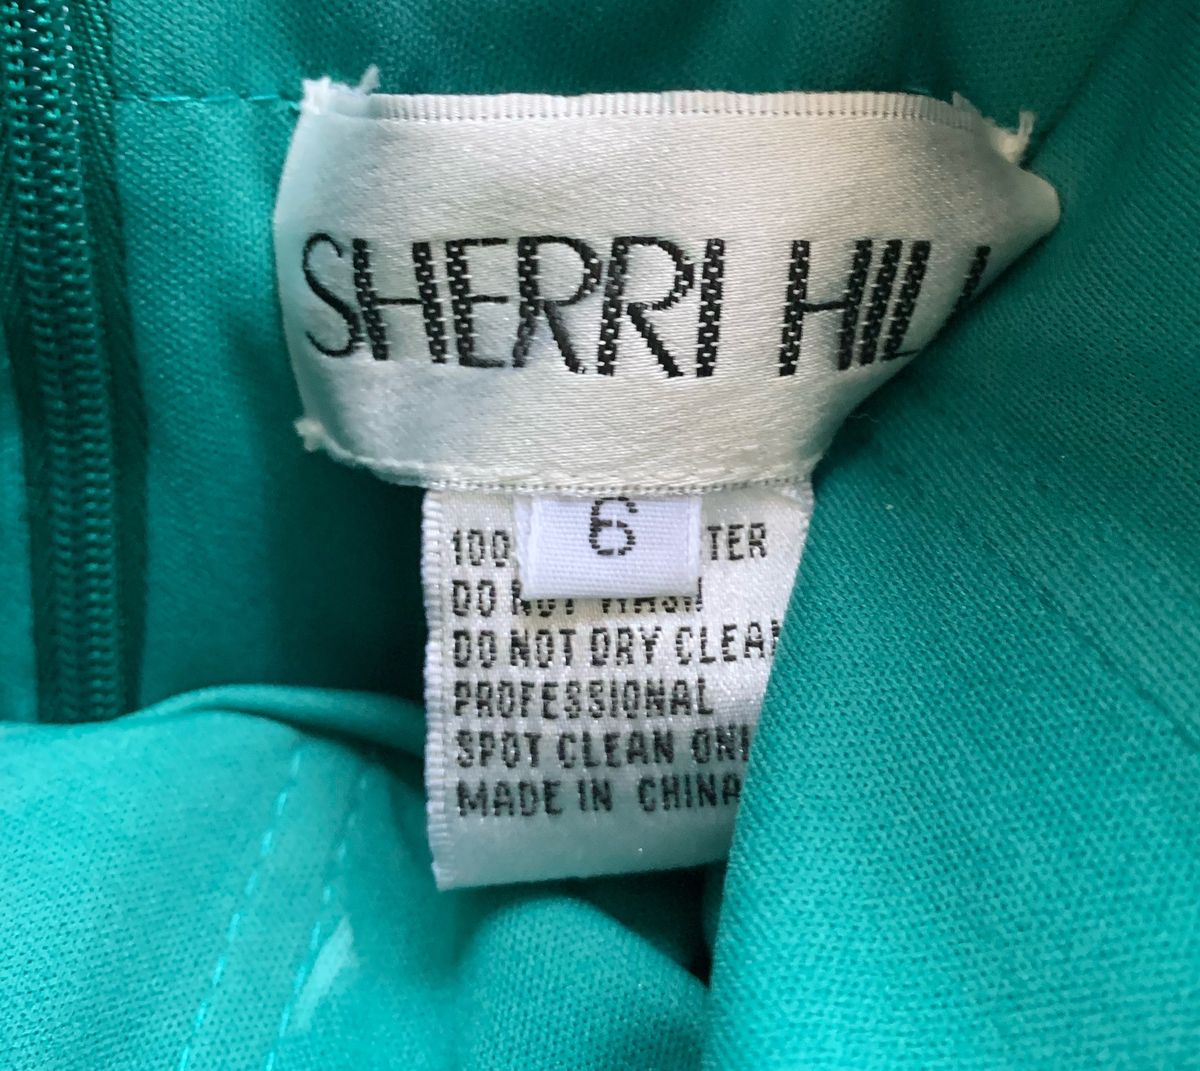 Sherri Hill Size 6 Green A-line Dress on Queenly